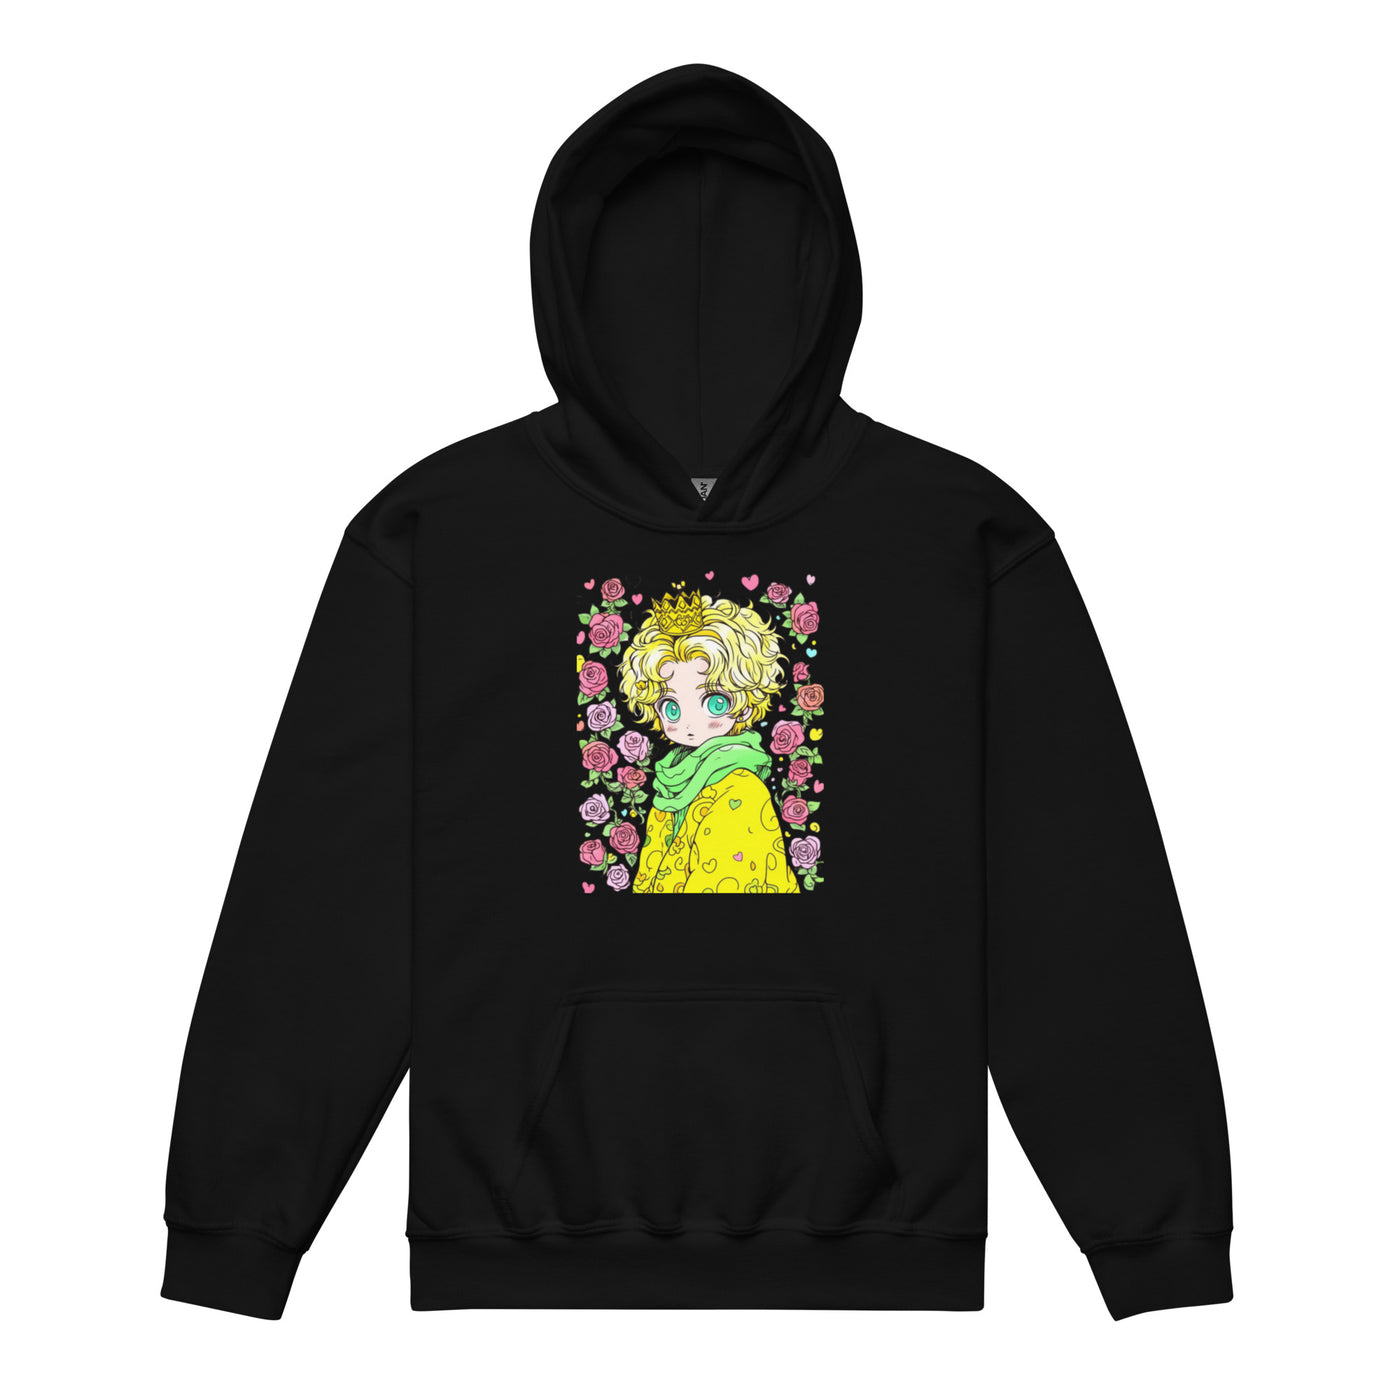 Little prince Youth heavy blend hoodie XS-XL Unisex - Coco Potato - dresses and partywear for little girls